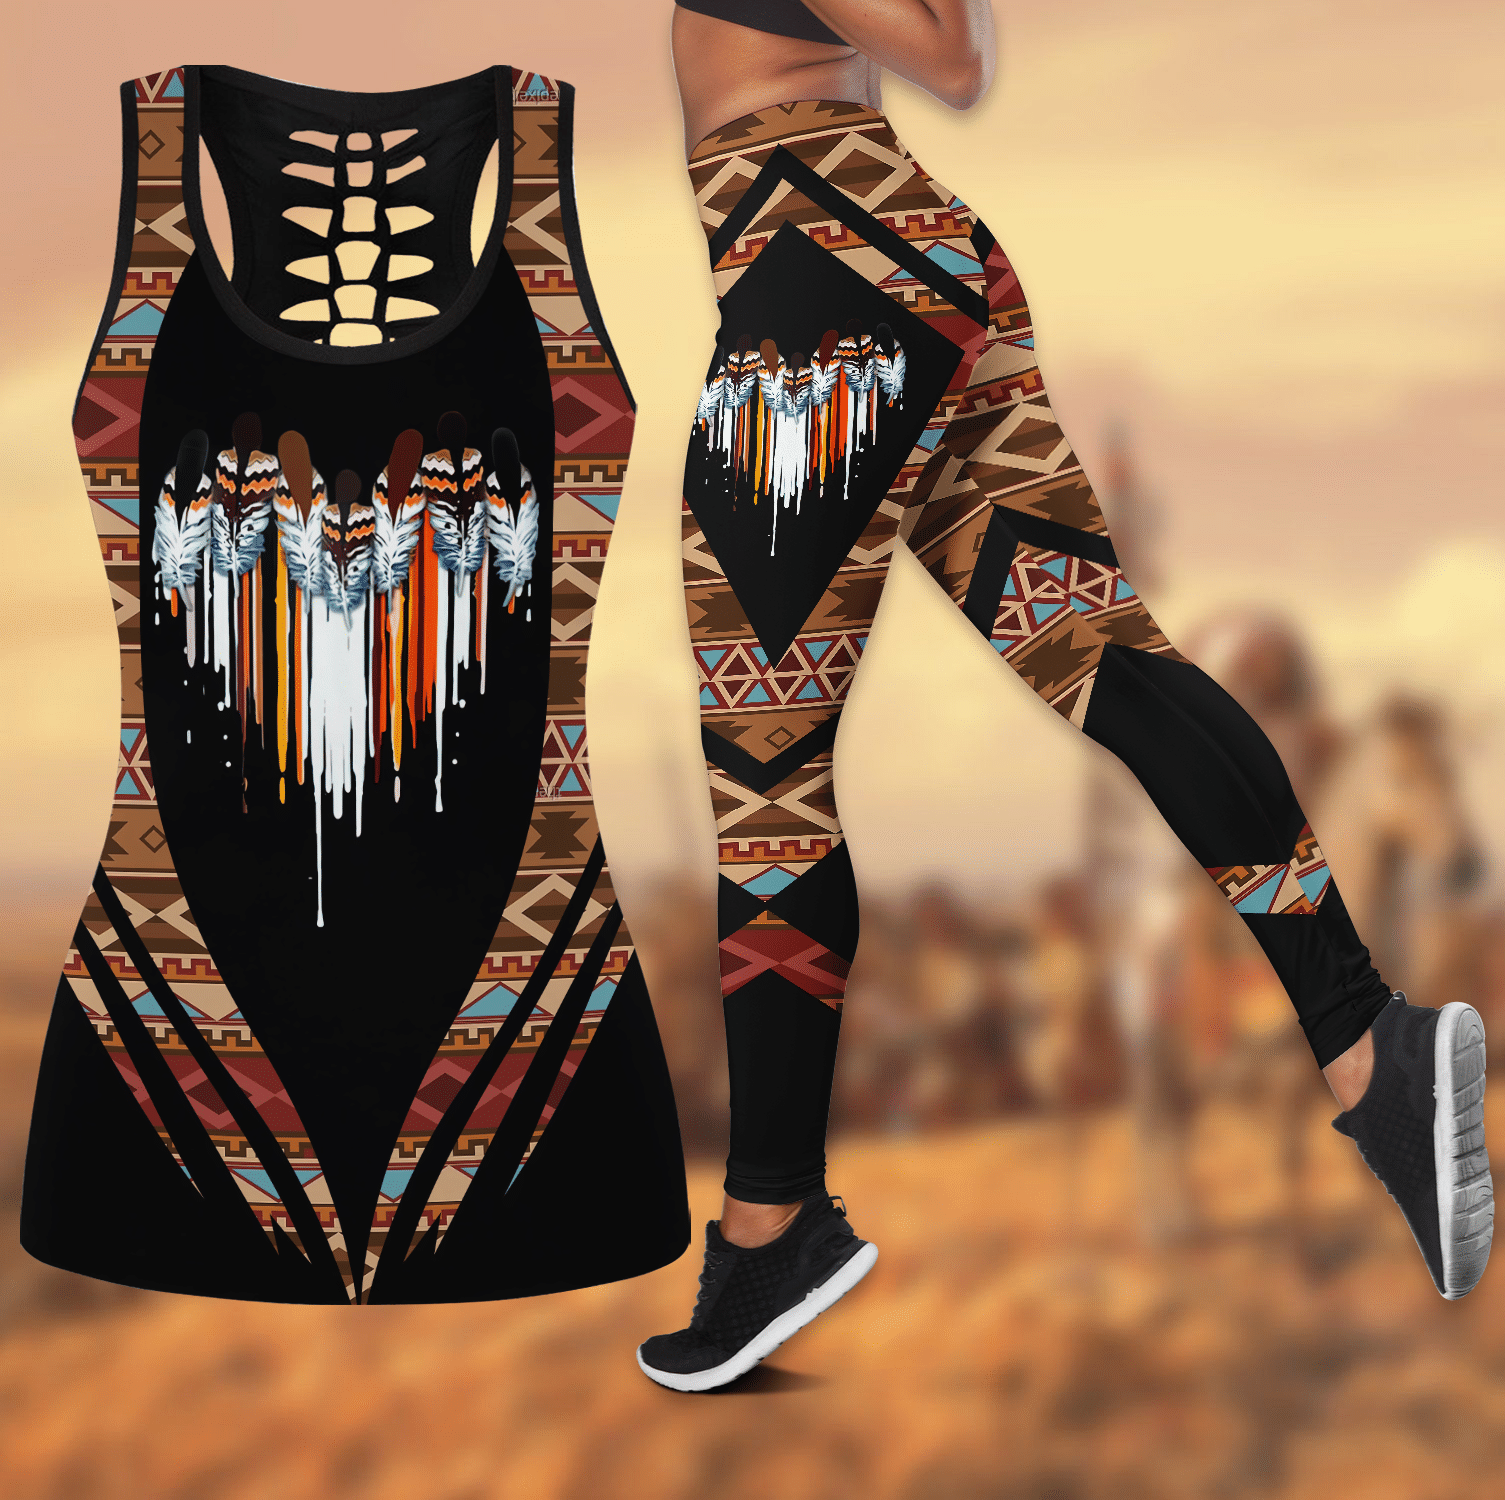 native-american-brocade-patterns-all-over-printed-leggings-and-hollow-tank-am-style-design